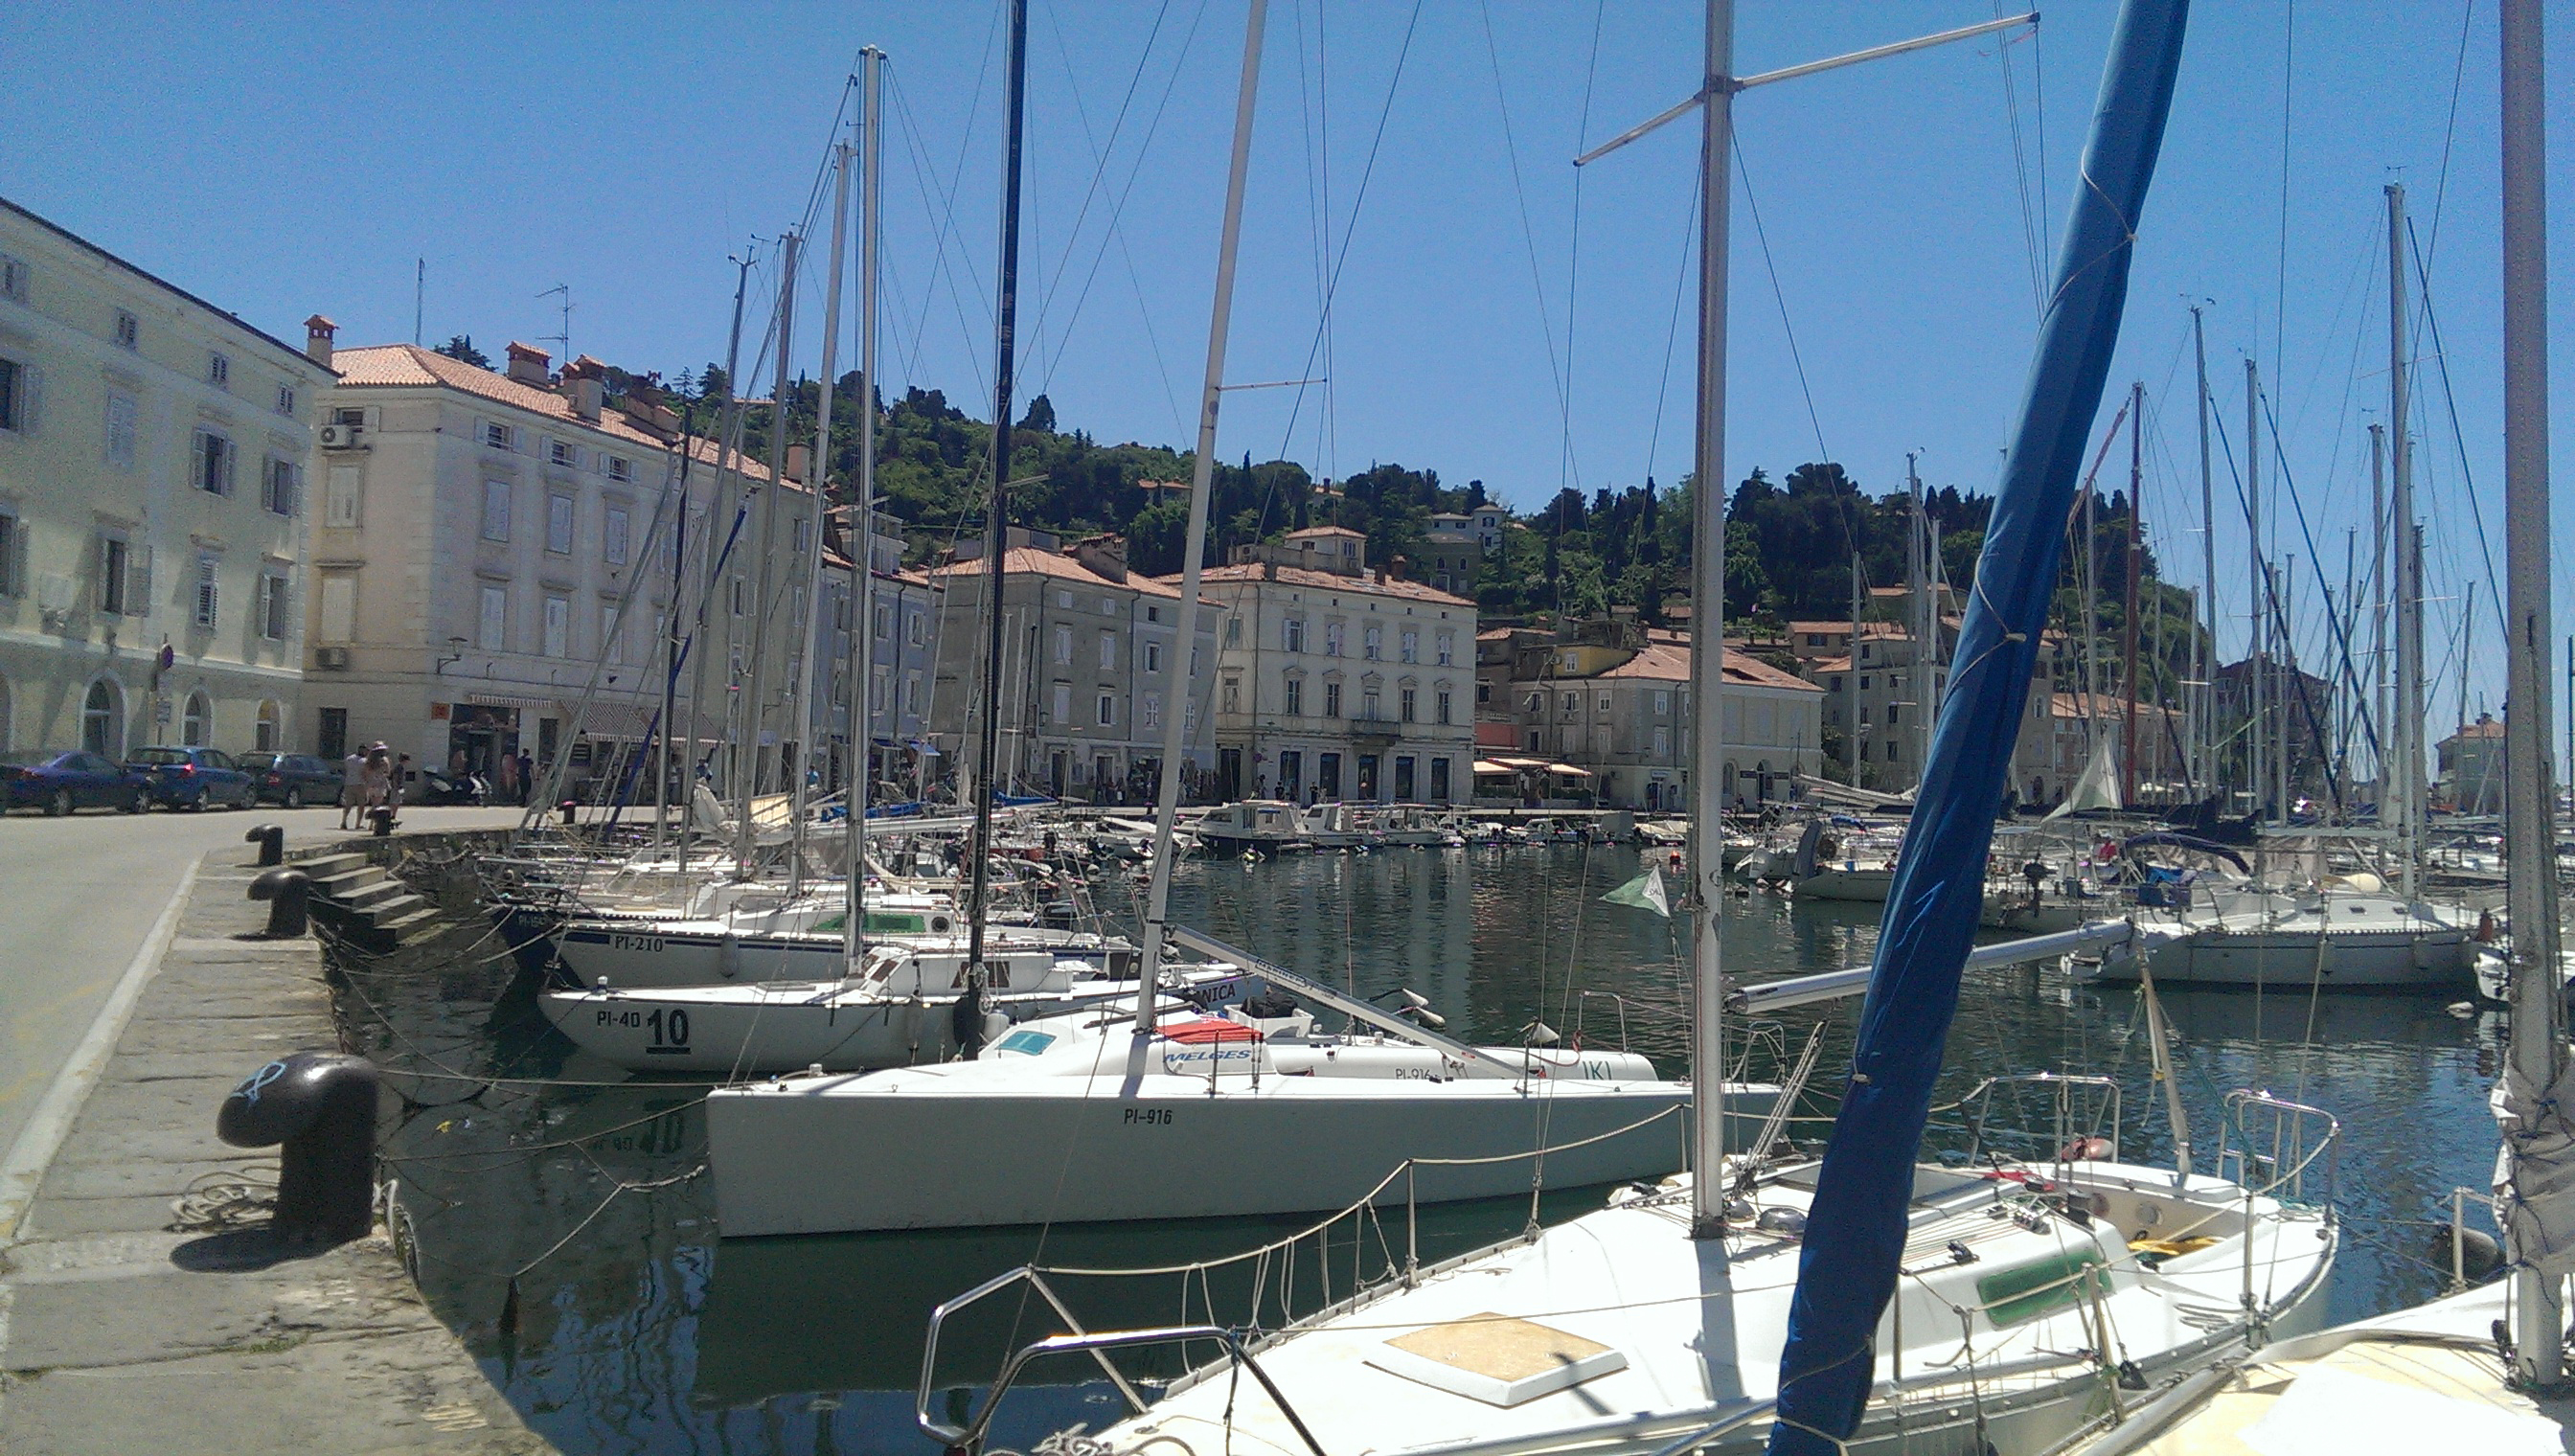 The charming harbour in Piran